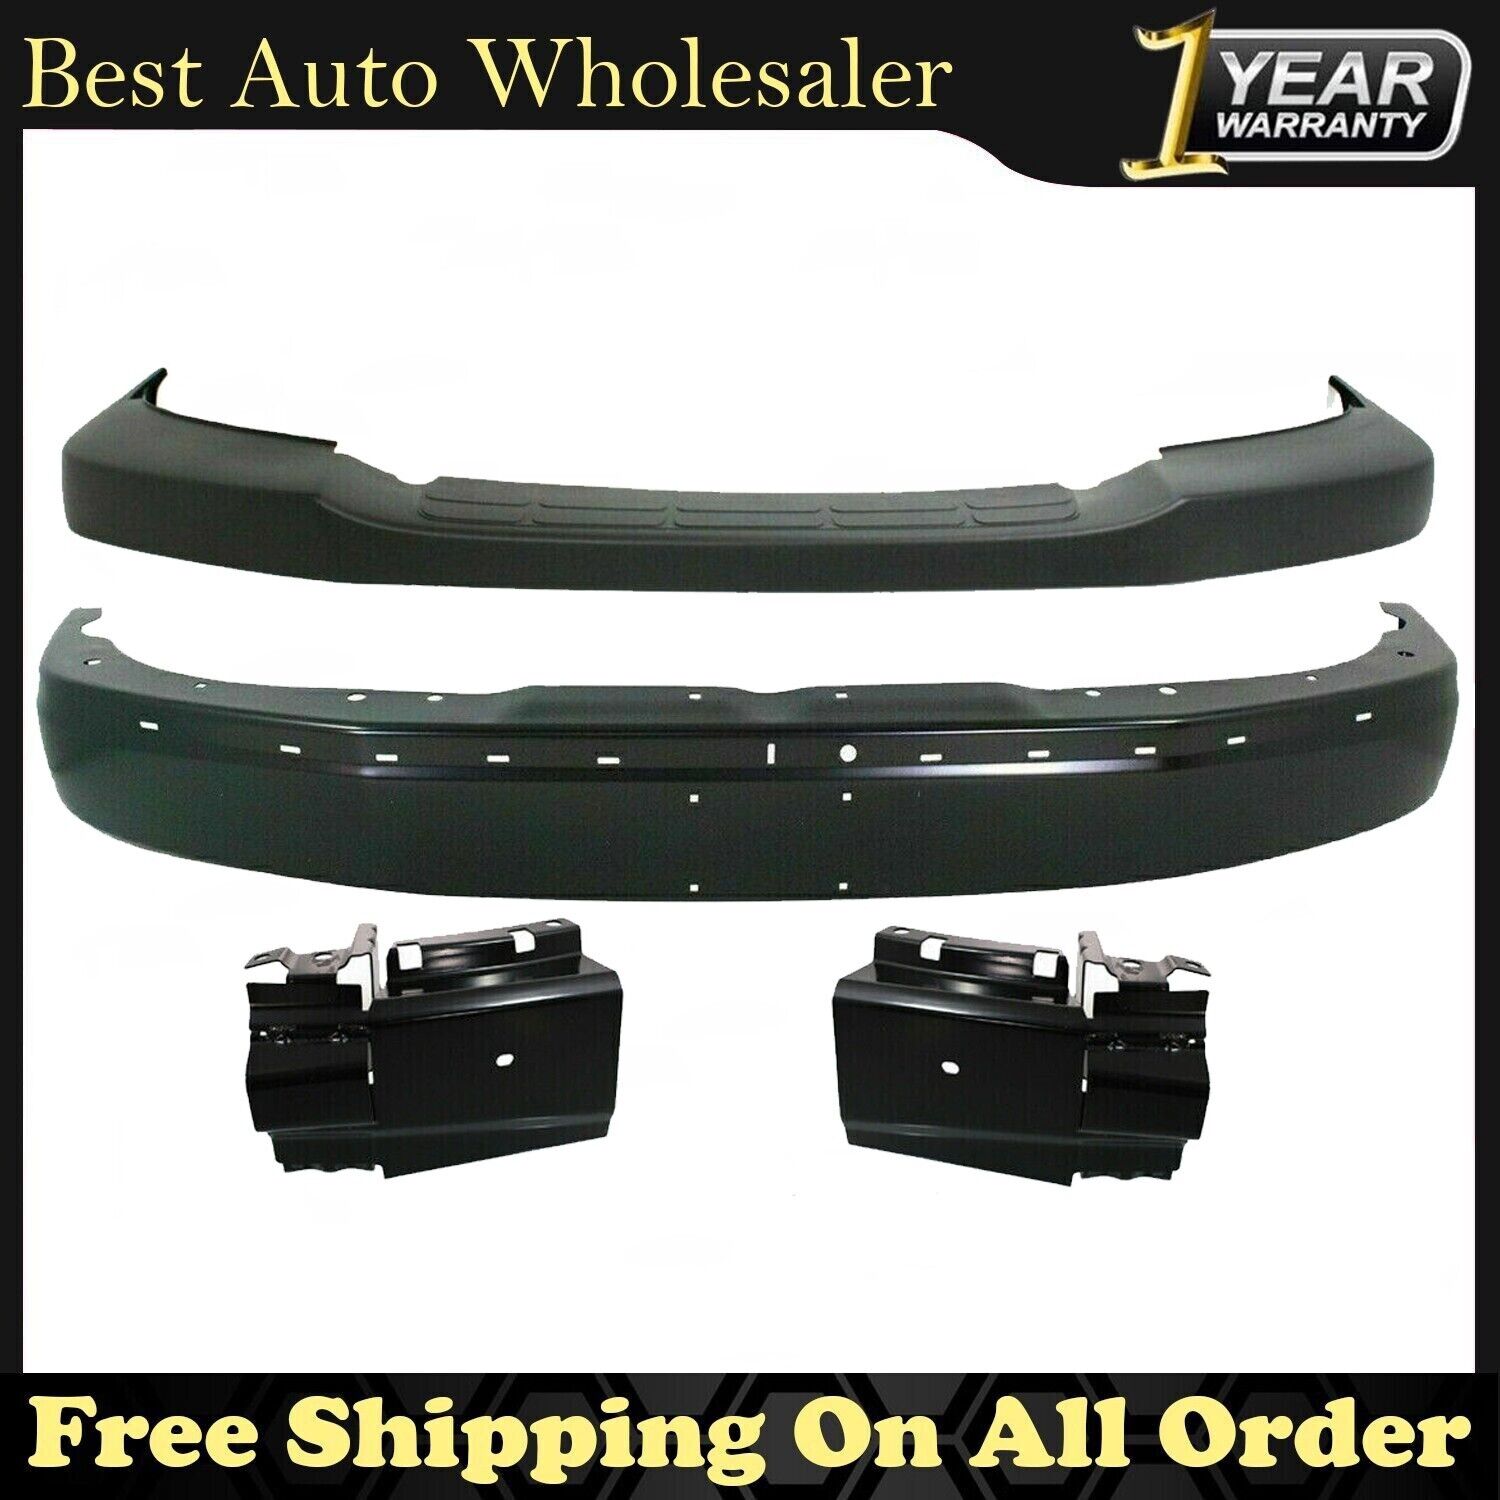 New Front Bumper Black +Cover + Brackets For 2003- 2021 Express Savana 2500 3500